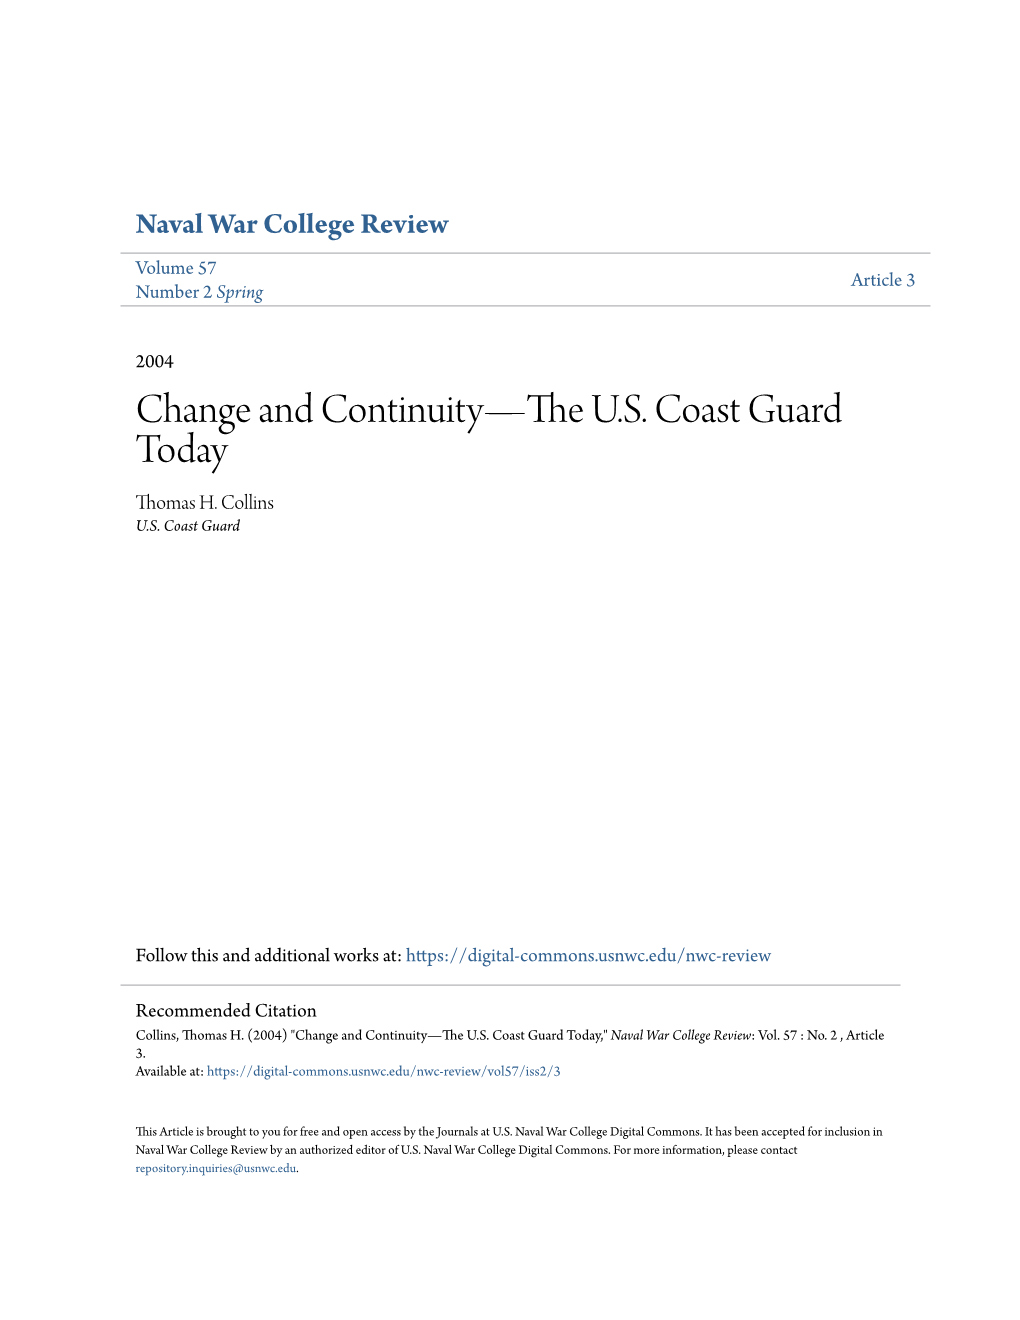 Change and Continuity—The U.S. Coast Guard Today